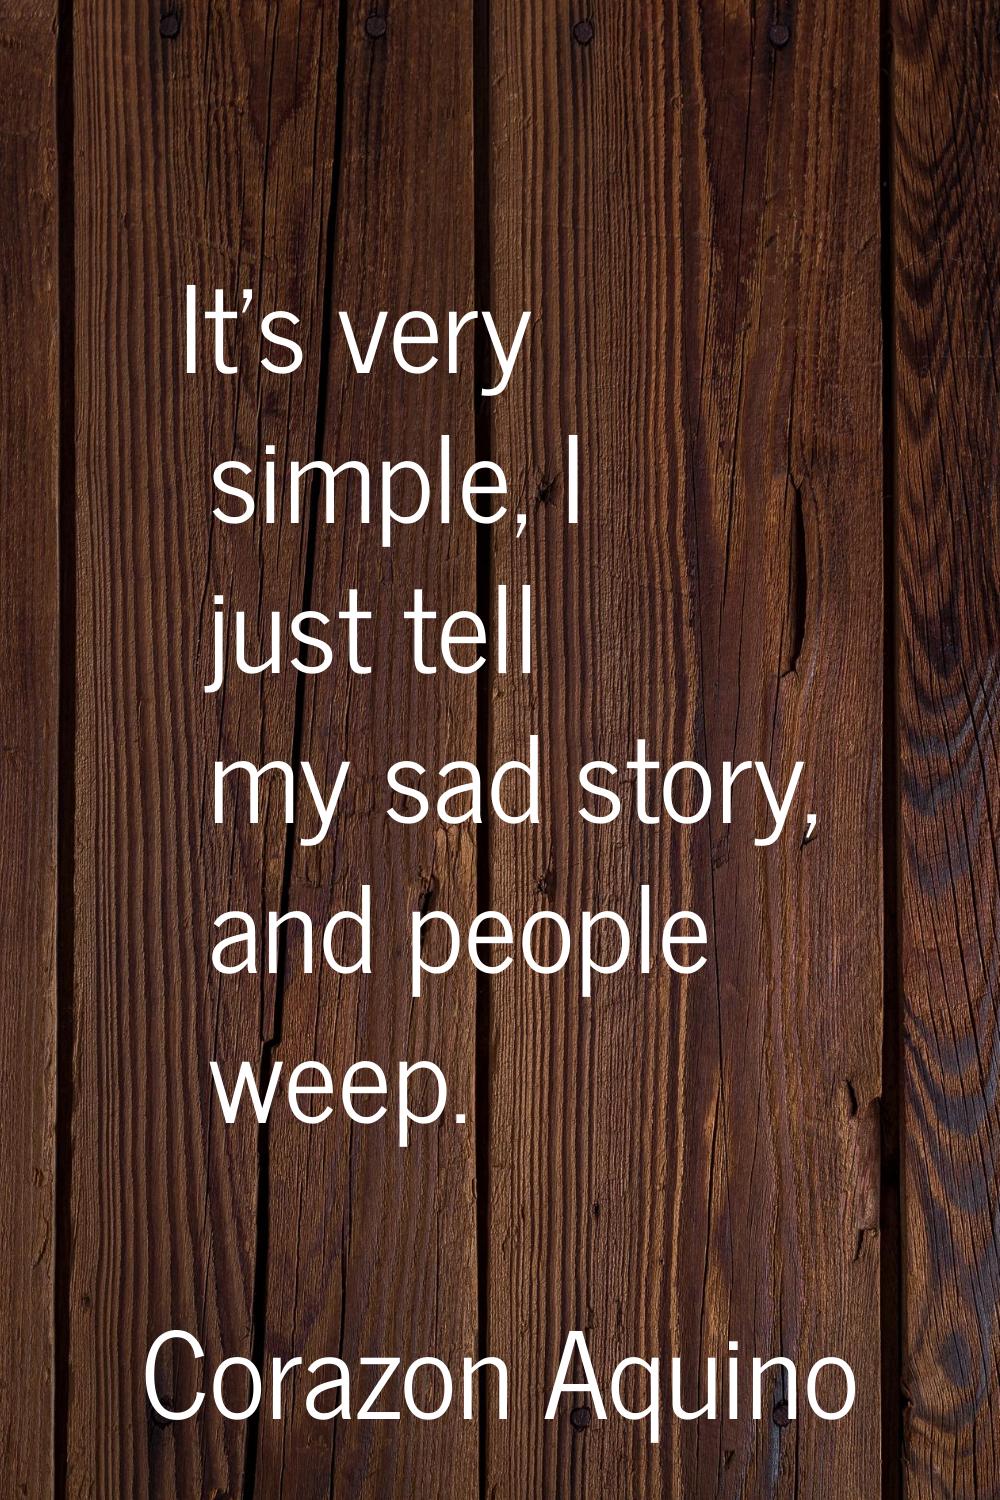 It's very simple, I just tell my sad story, and people weep.